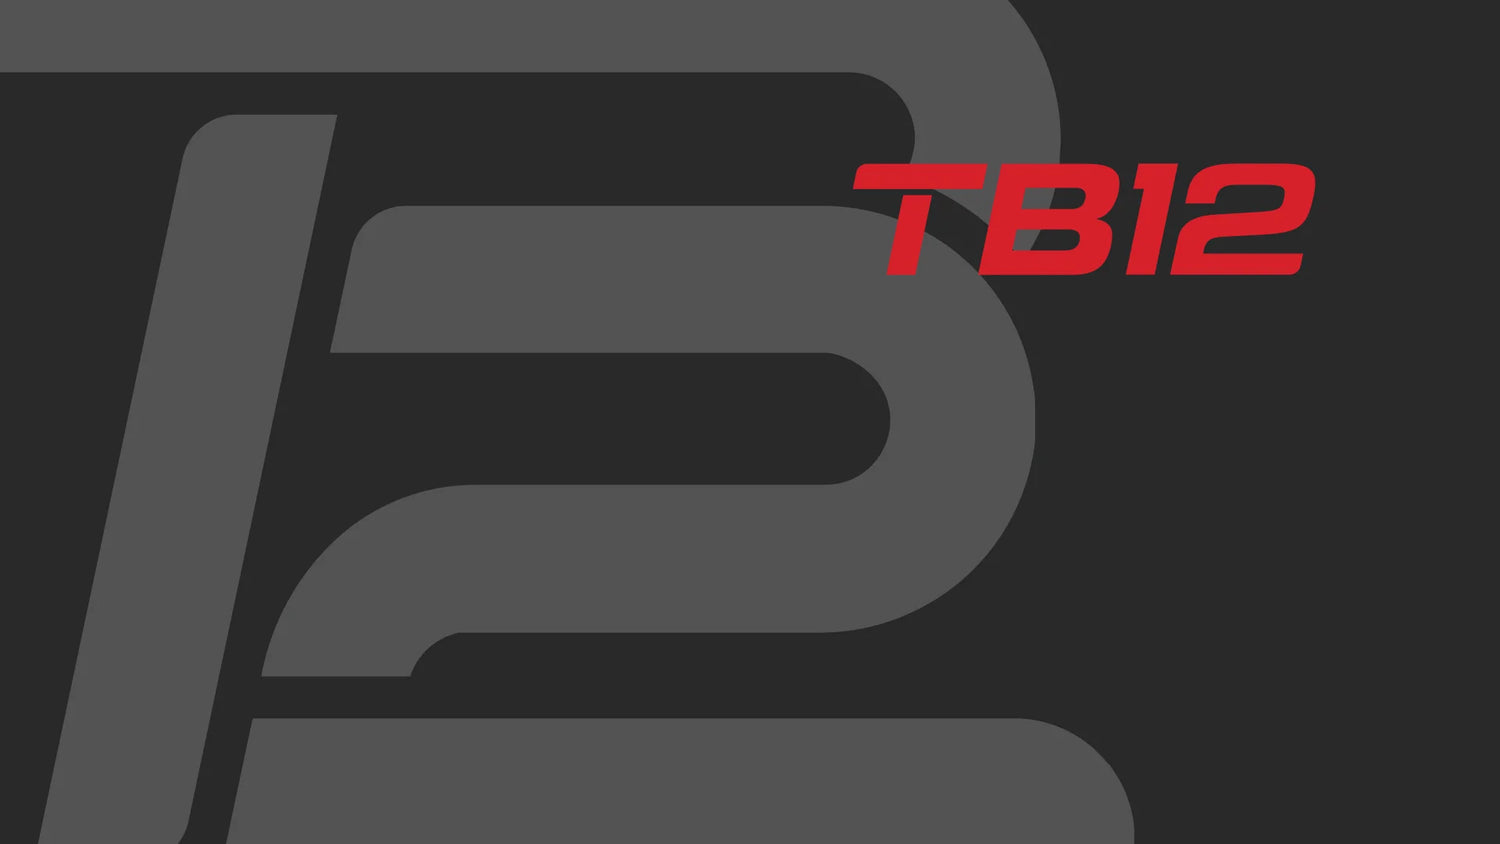 TB12 Nutrition Mailbag #1 – Favorite Snacks, Protein, Hydration Tips & More